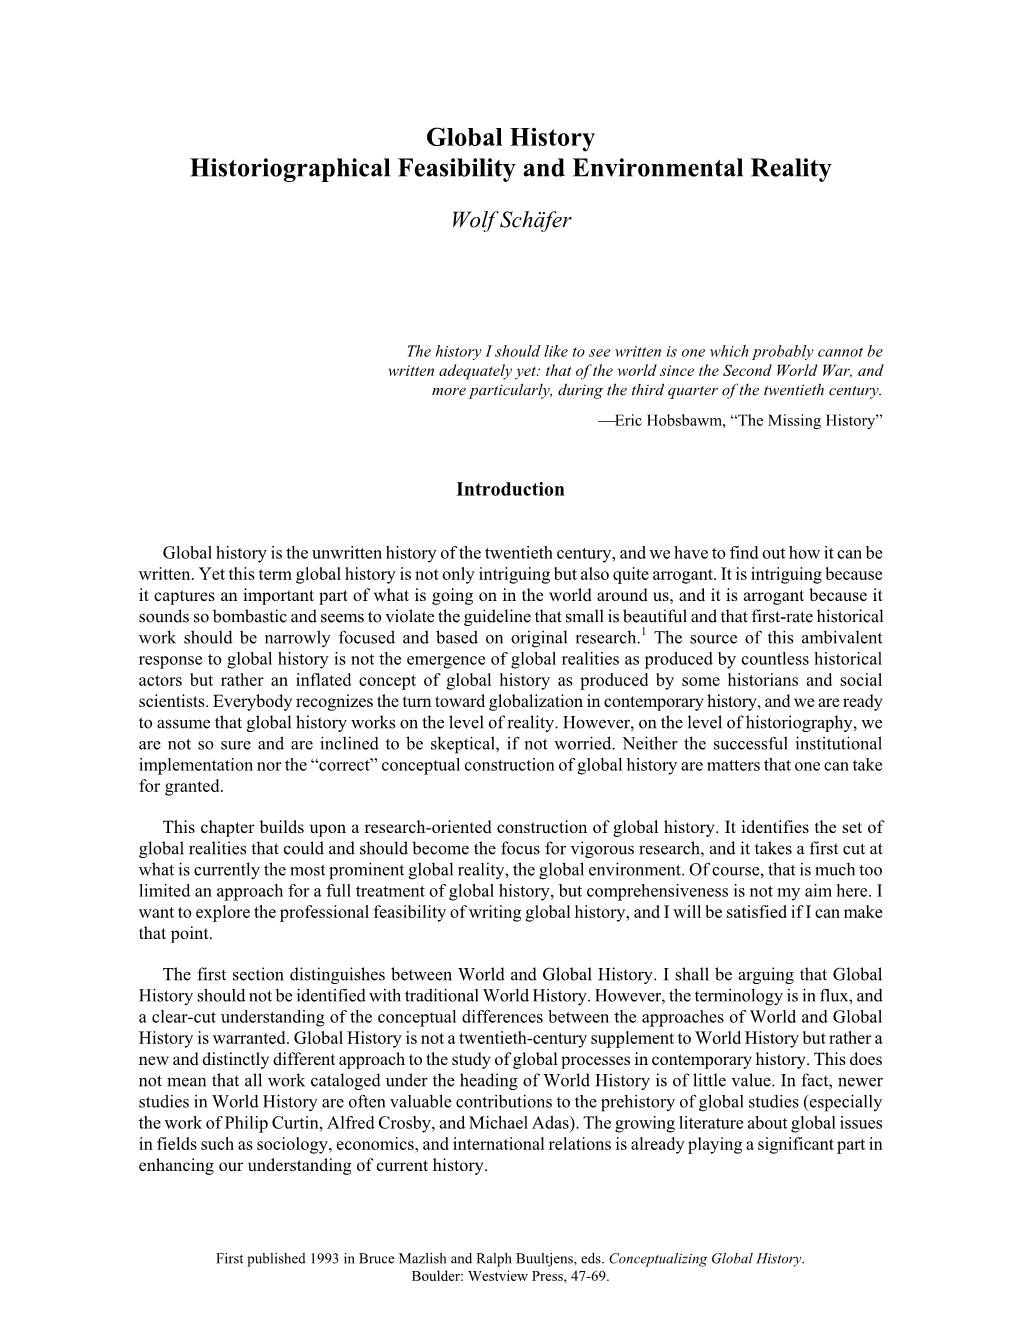 Global History Historiographical Feasibility and Environmental Reality